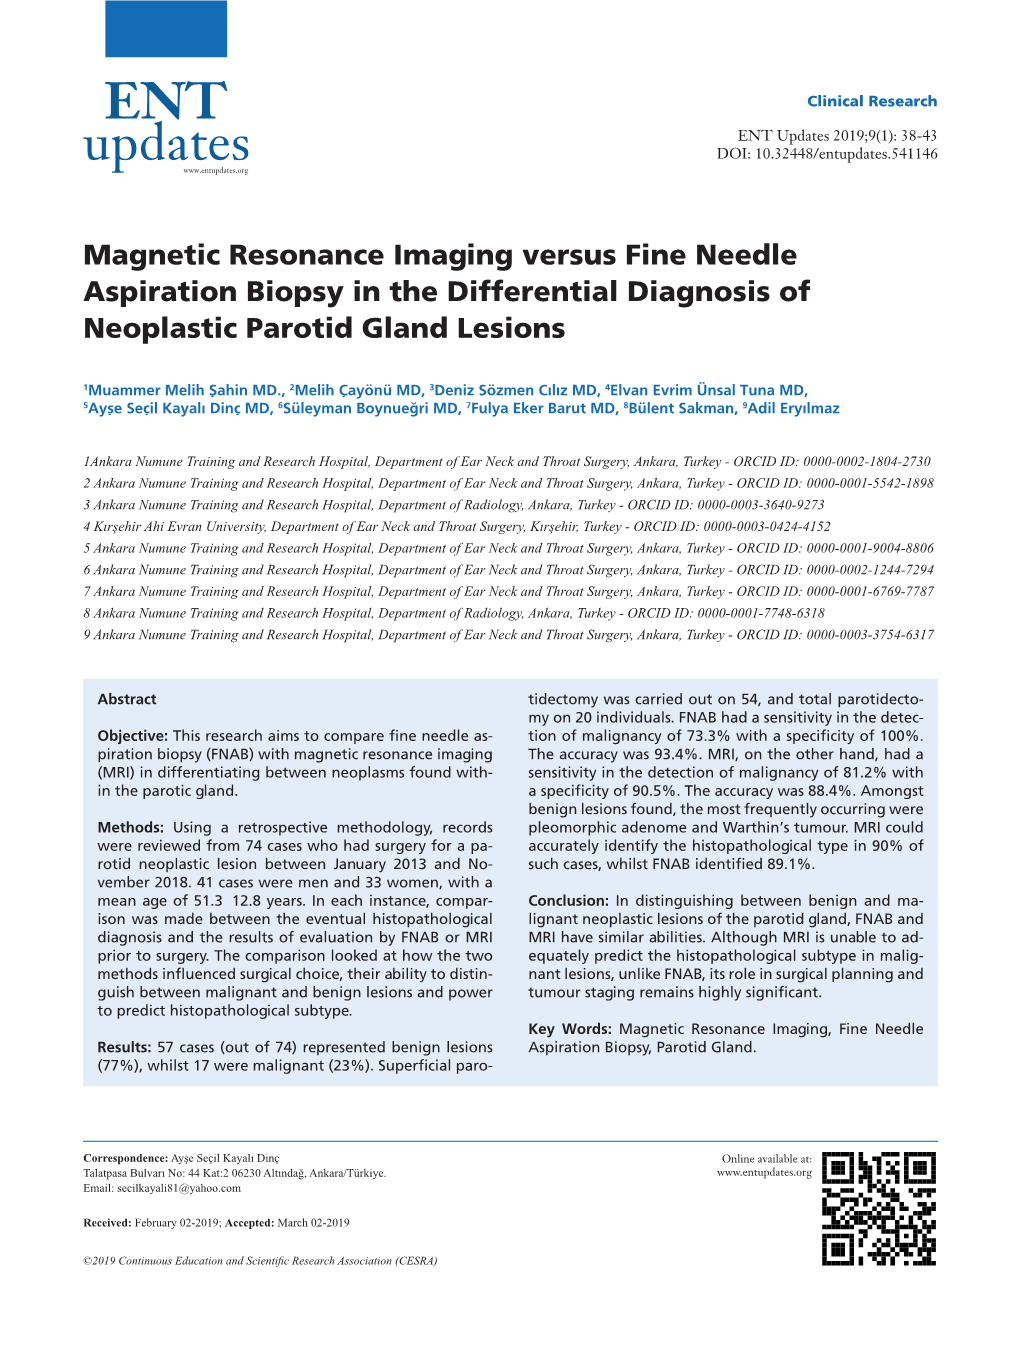 Magnetic Resonance Imaging Versus Fine Needle Aspiration Biopsy in the Differential Diagnosis of Neoplastic Parotid Gland Lesions